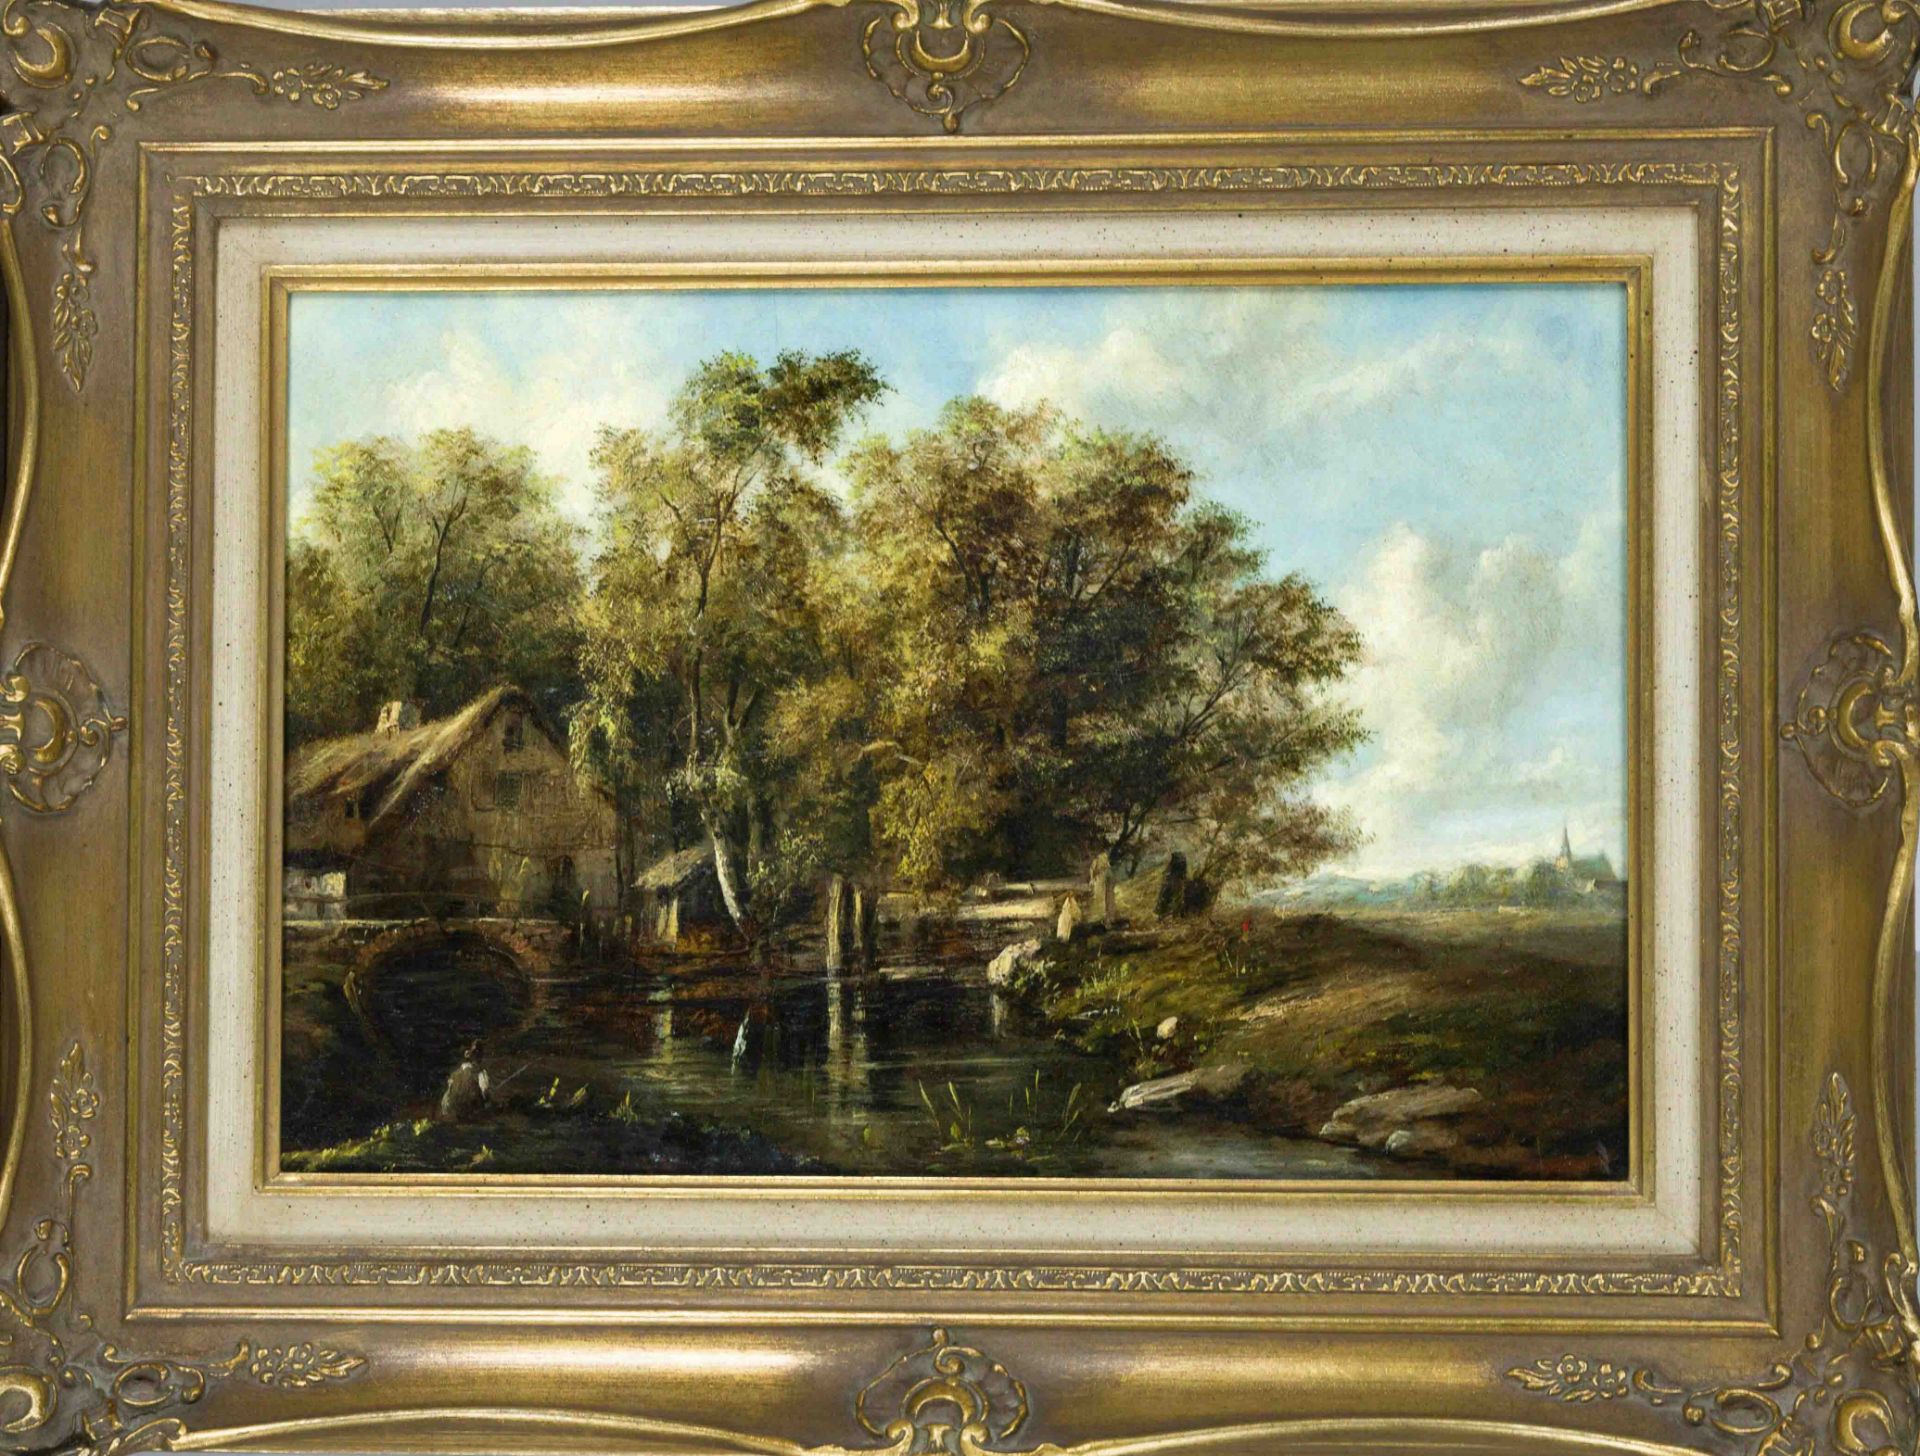 19th century landscape painter, Summer forest scene with pond and angler, oil on canvas, unsigned,